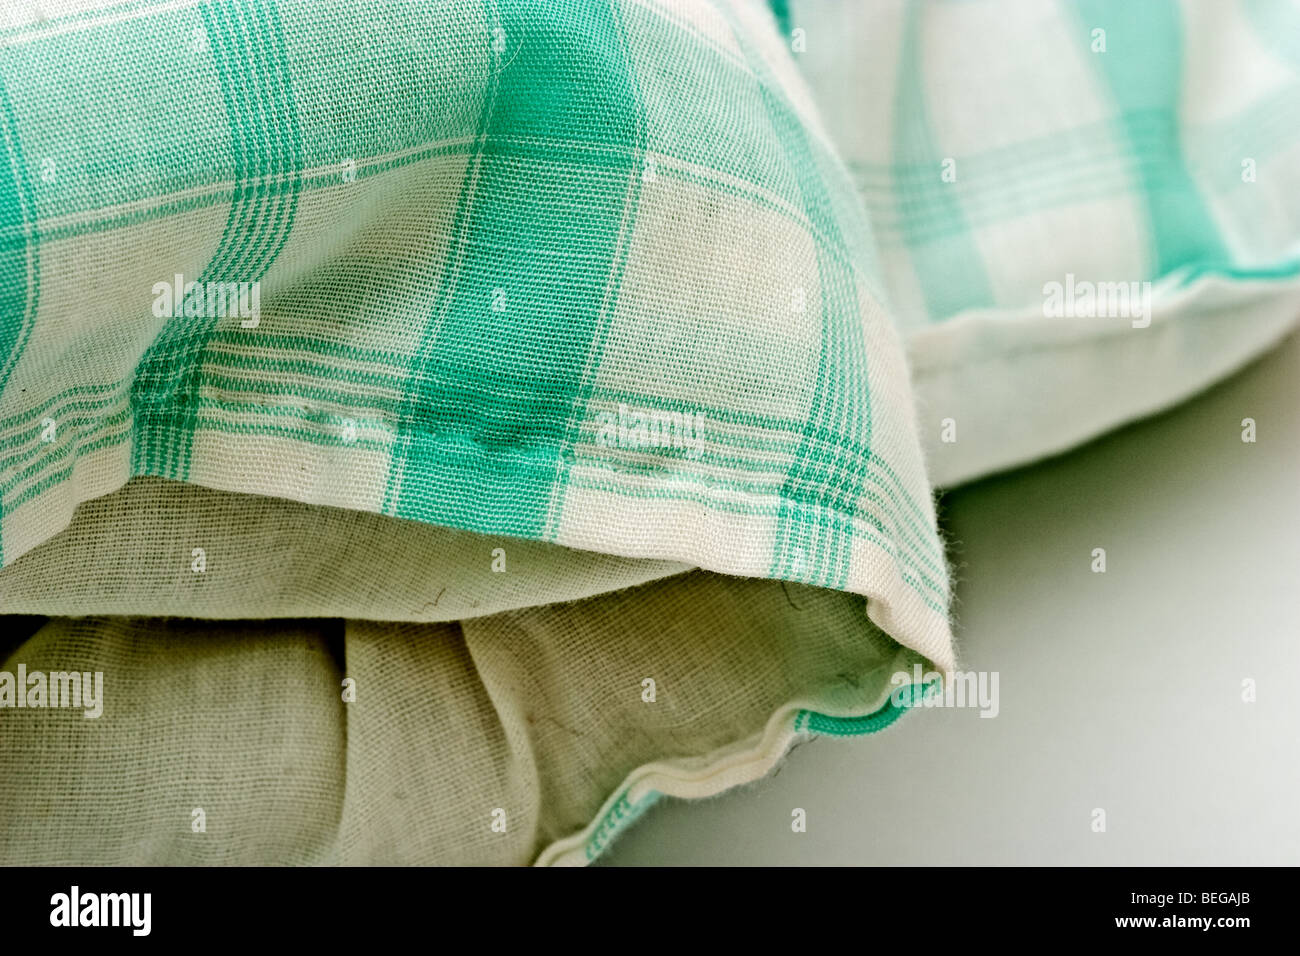 White and green plaid patterned quilt blanket Stock Photo